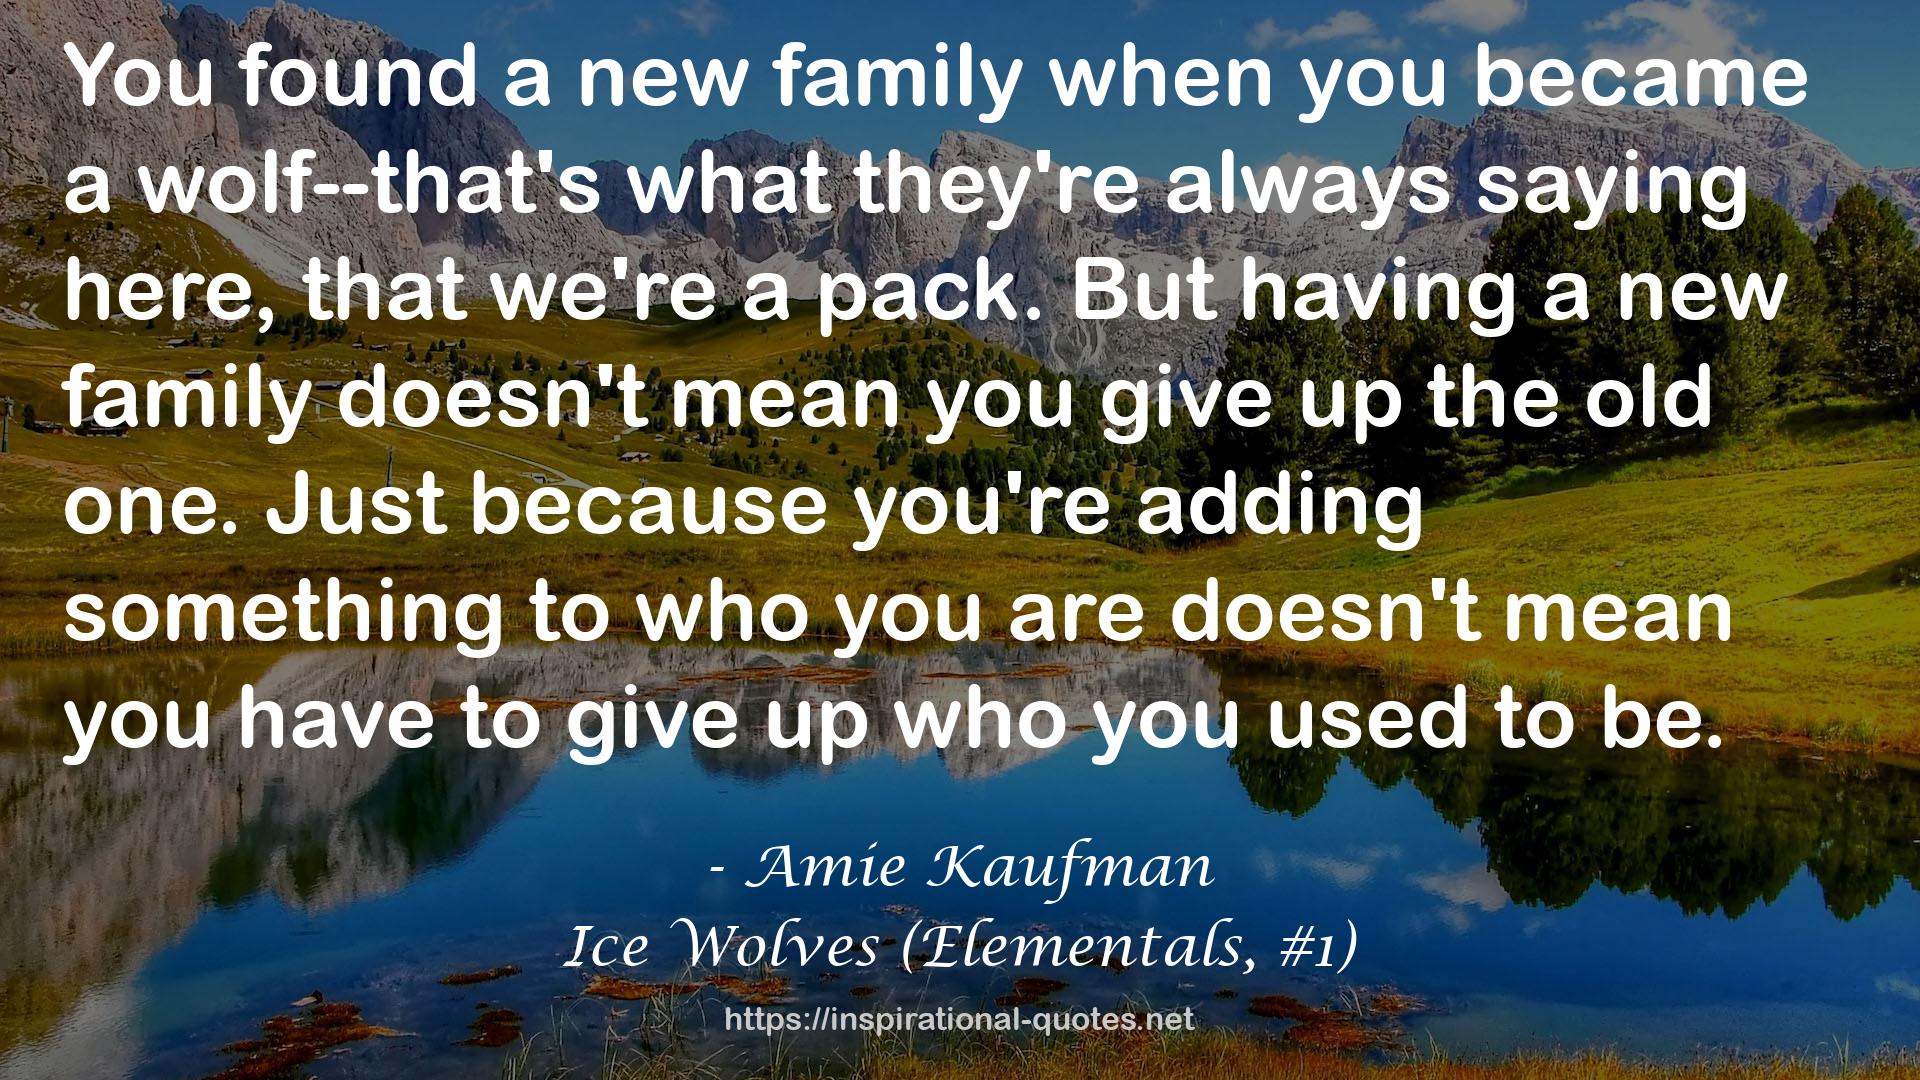 Ice Wolves (Elementals, #1) QUOTES